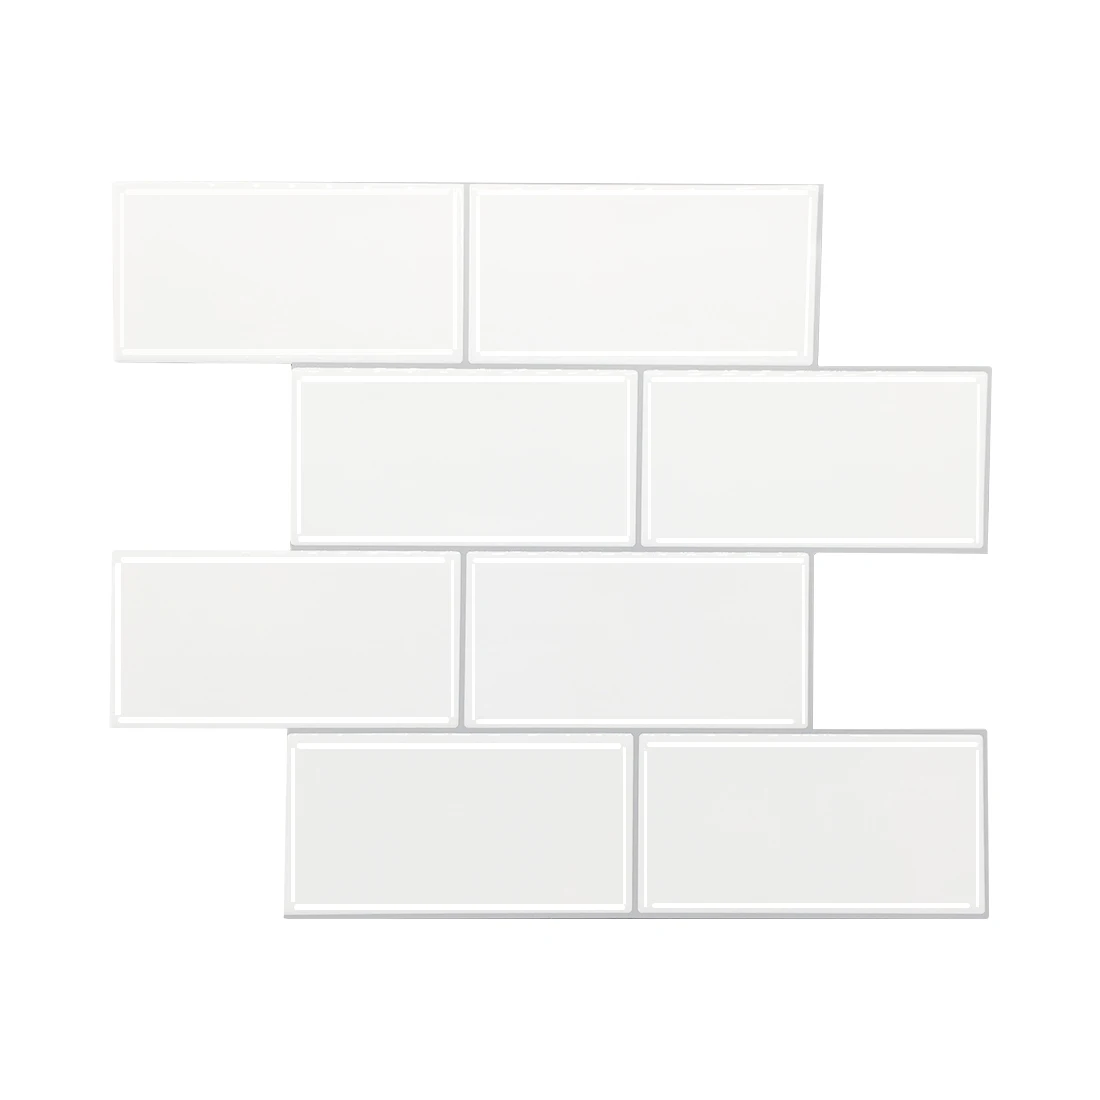 

China style selection waterproof peel and stick thicker upgrade design white subway tiles for kitchen bathroom shower walls